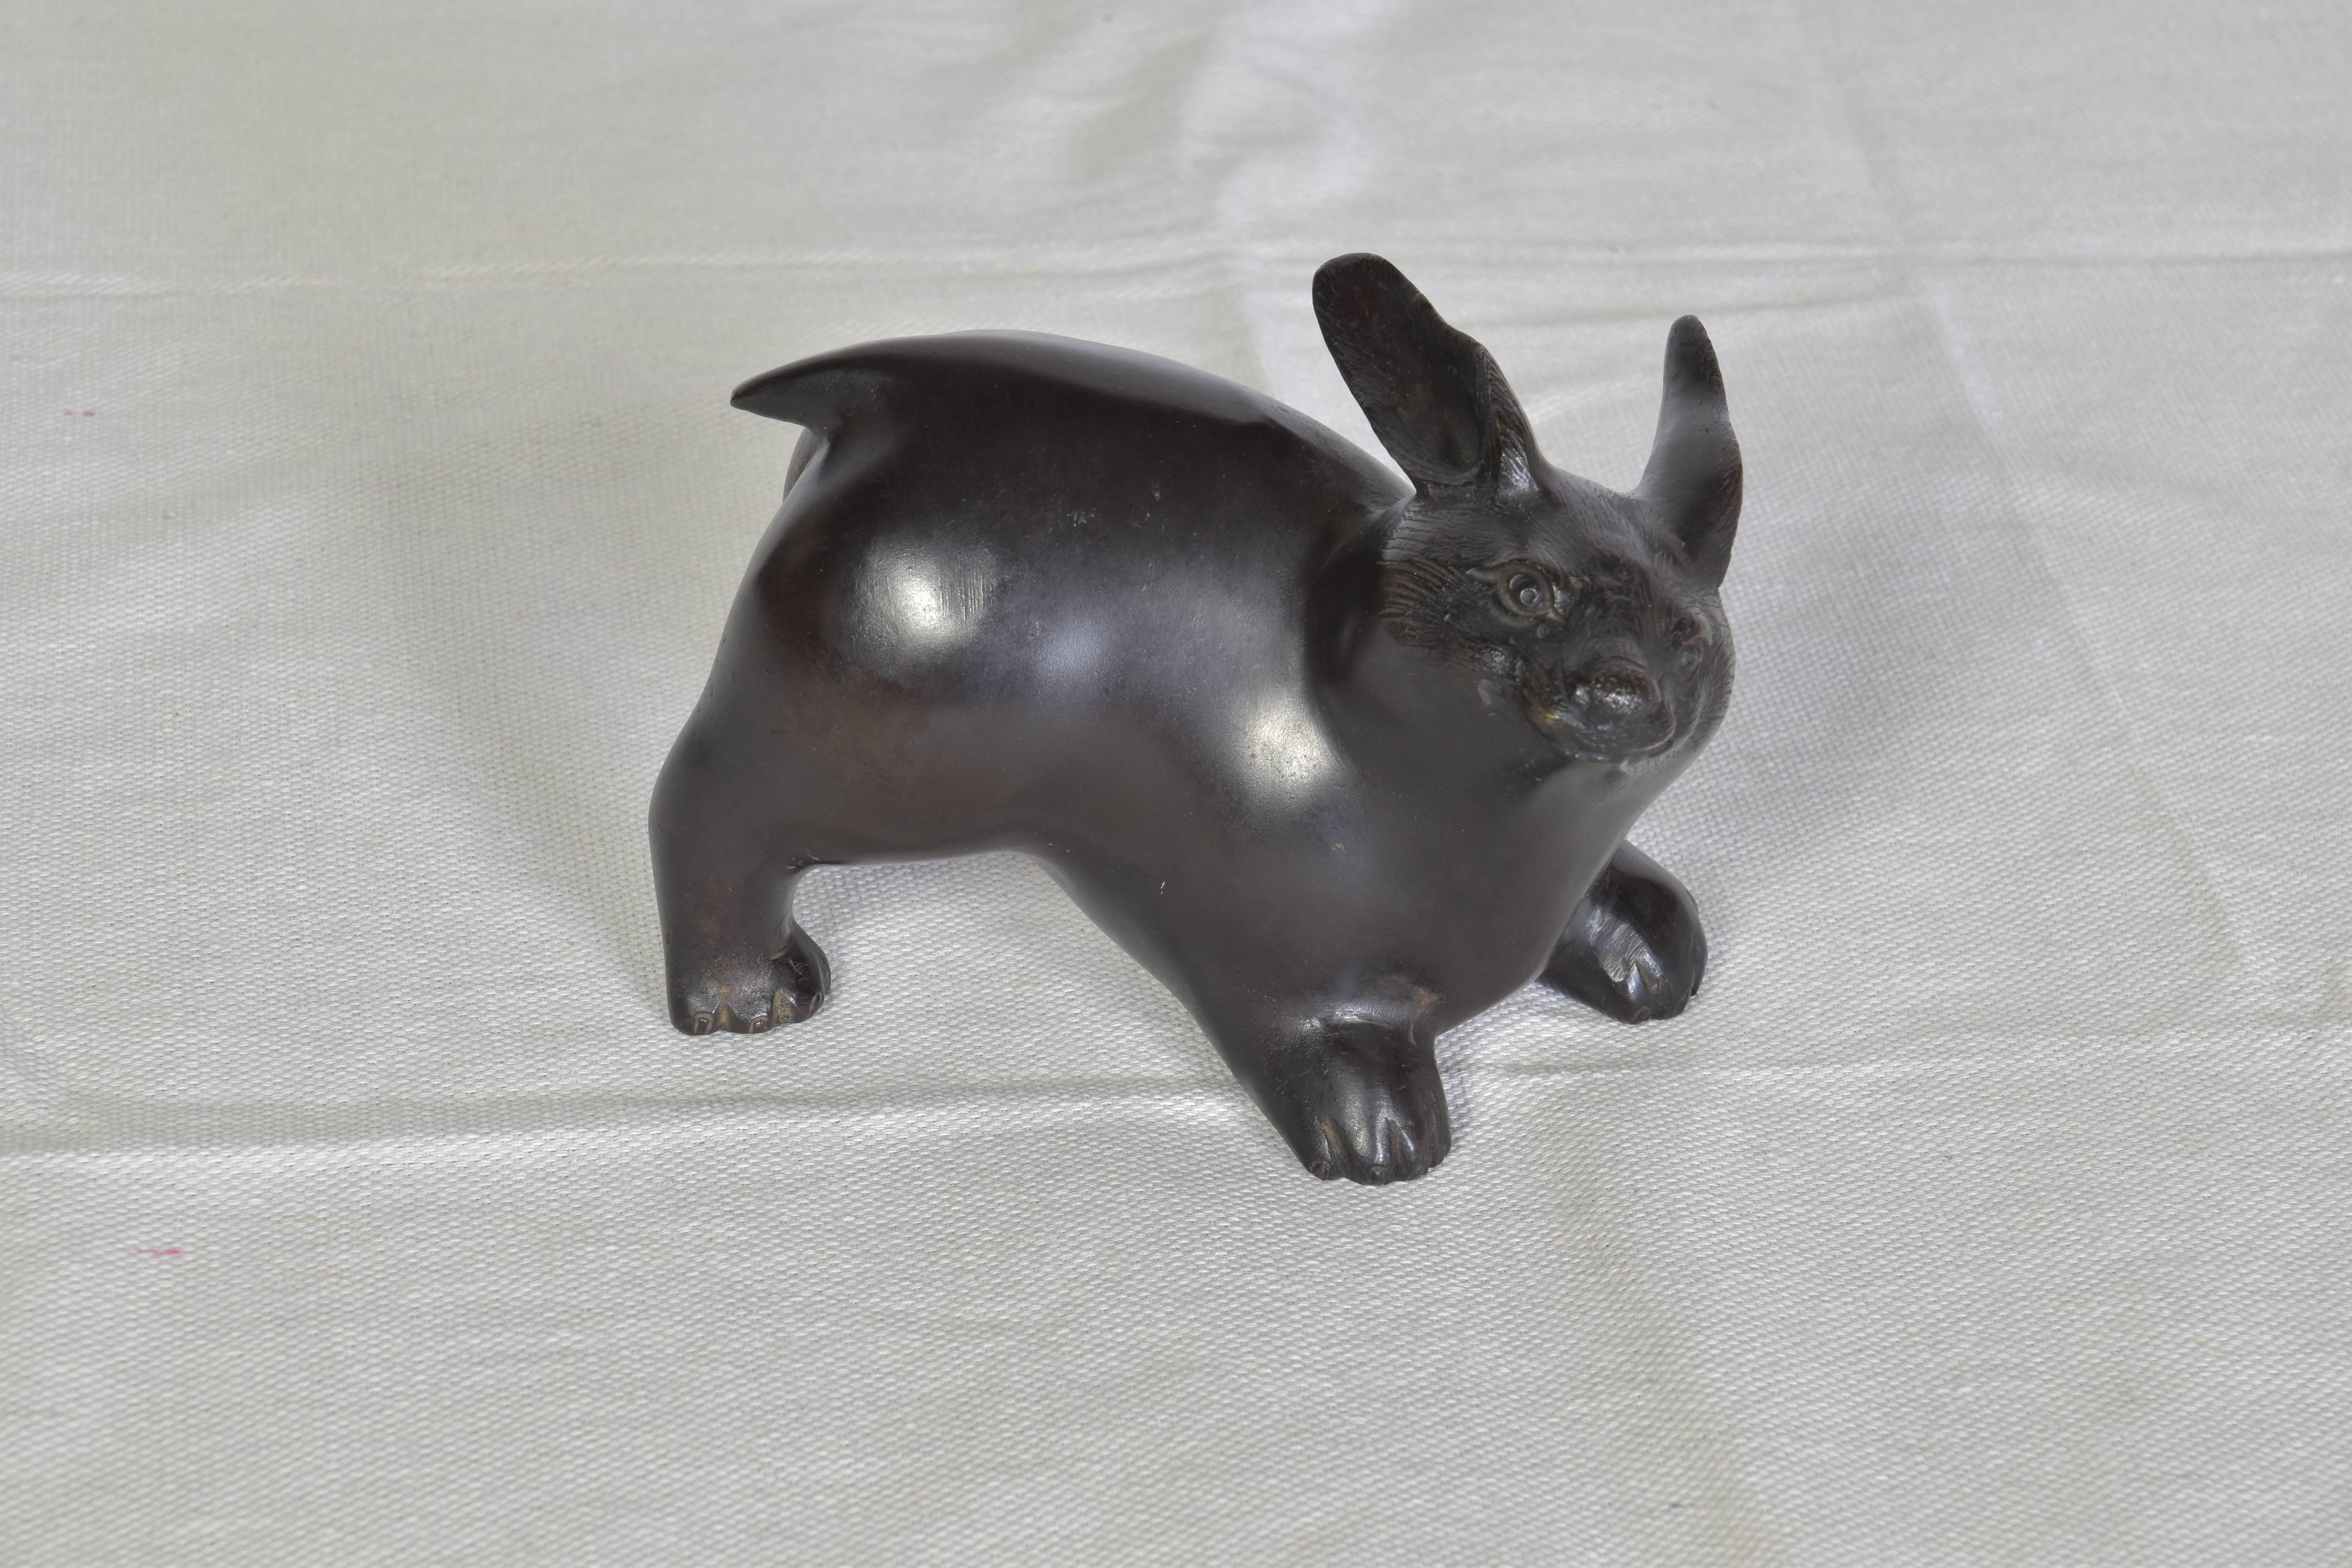 Charming bronze rabbit in a playful pose.